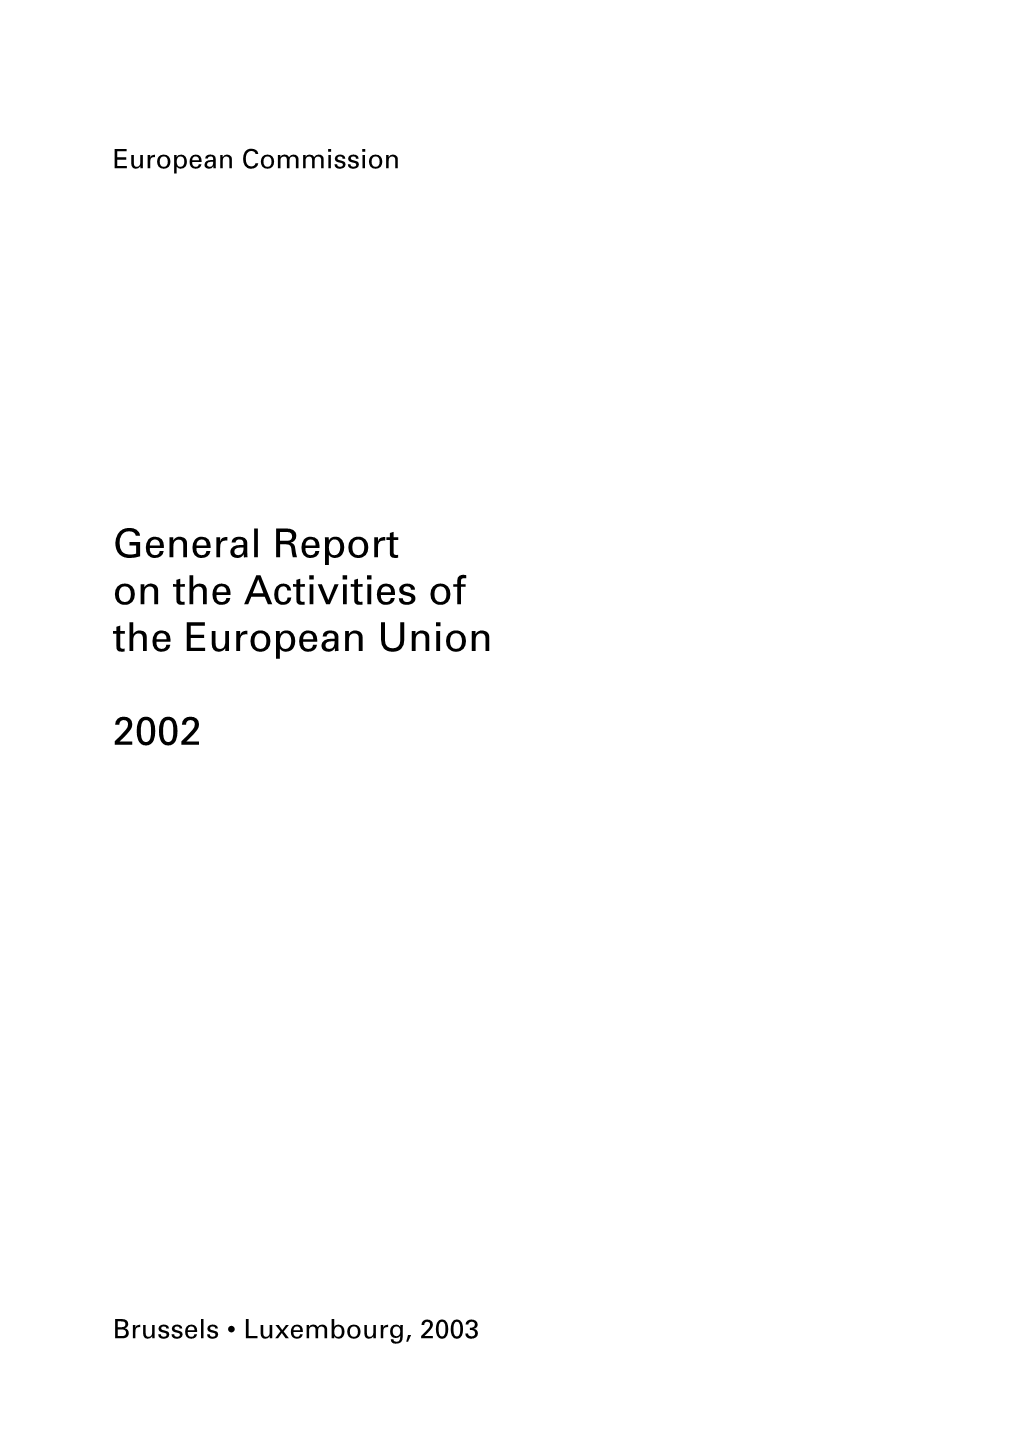 General Report on the Activities of the European Union 2002